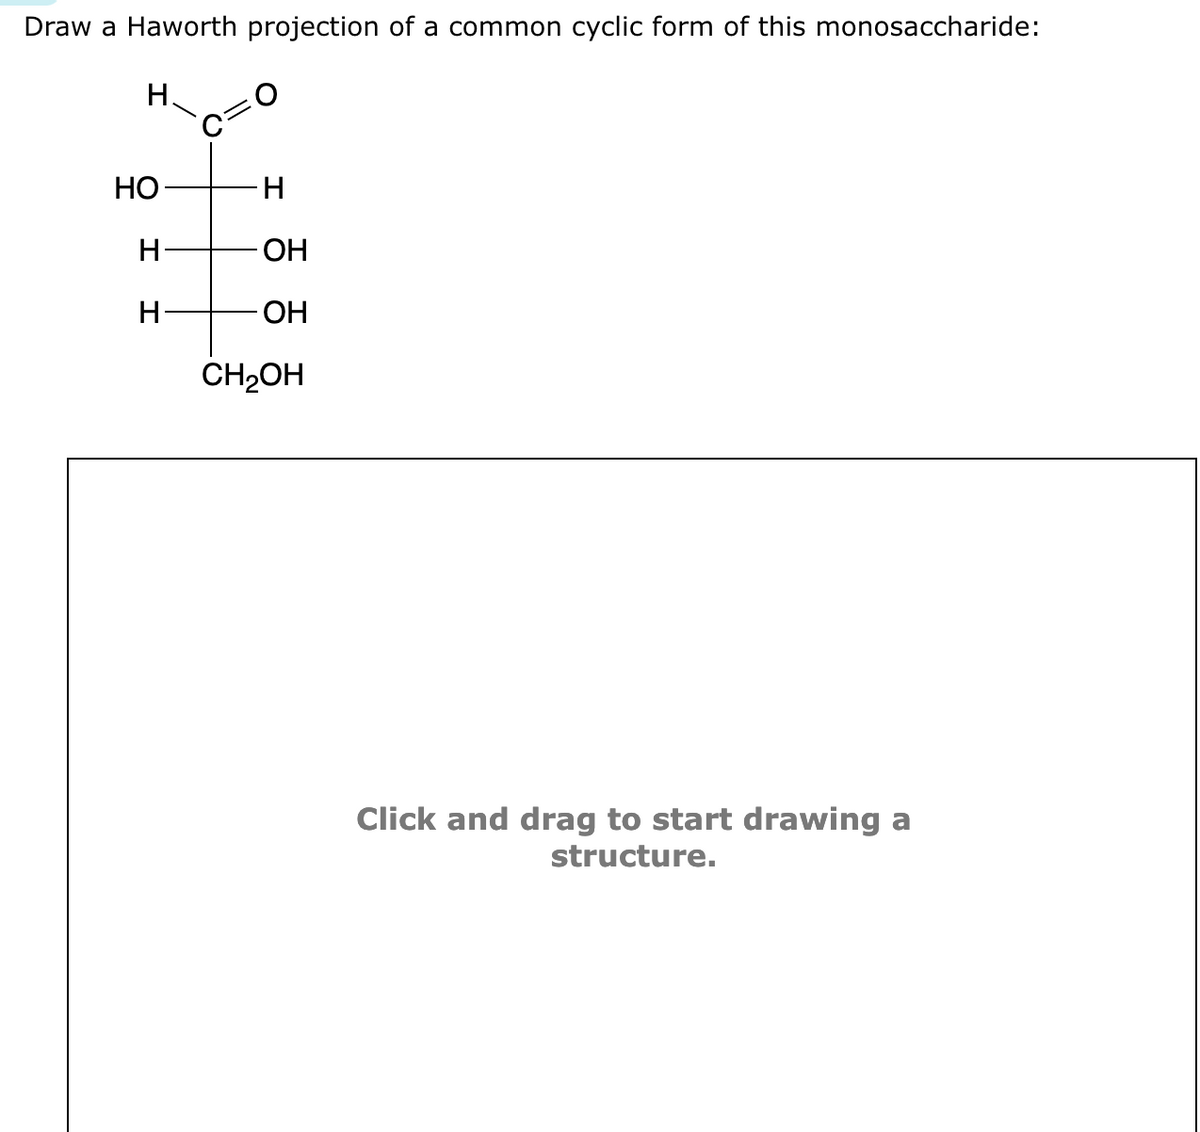 Draw a Haworth projection of a common cyclic form of this monosaccharide:
H
HO-
H
H-
-H
OH
- OH
CH₂OH
Click and drag to start drawing a
structure.